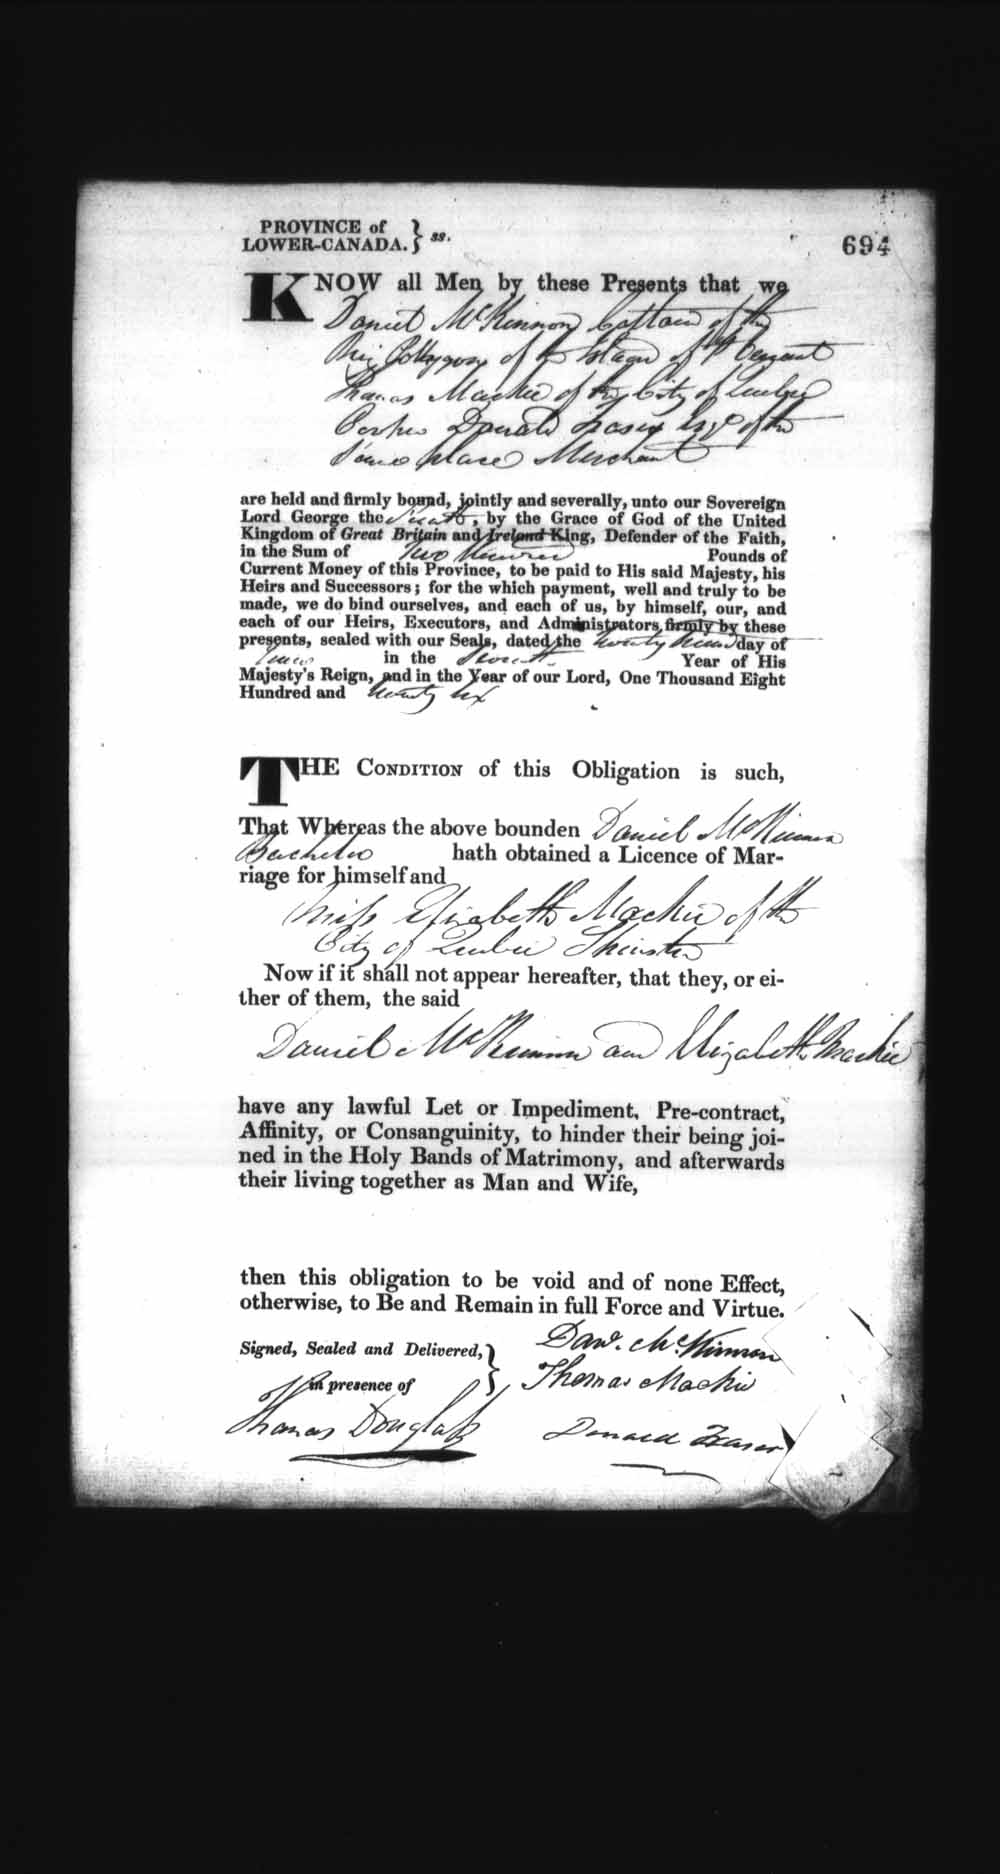 Digitized page of Upper and Lower Canada Marriage Bonds (1779-1865) for Image No.: e008236744